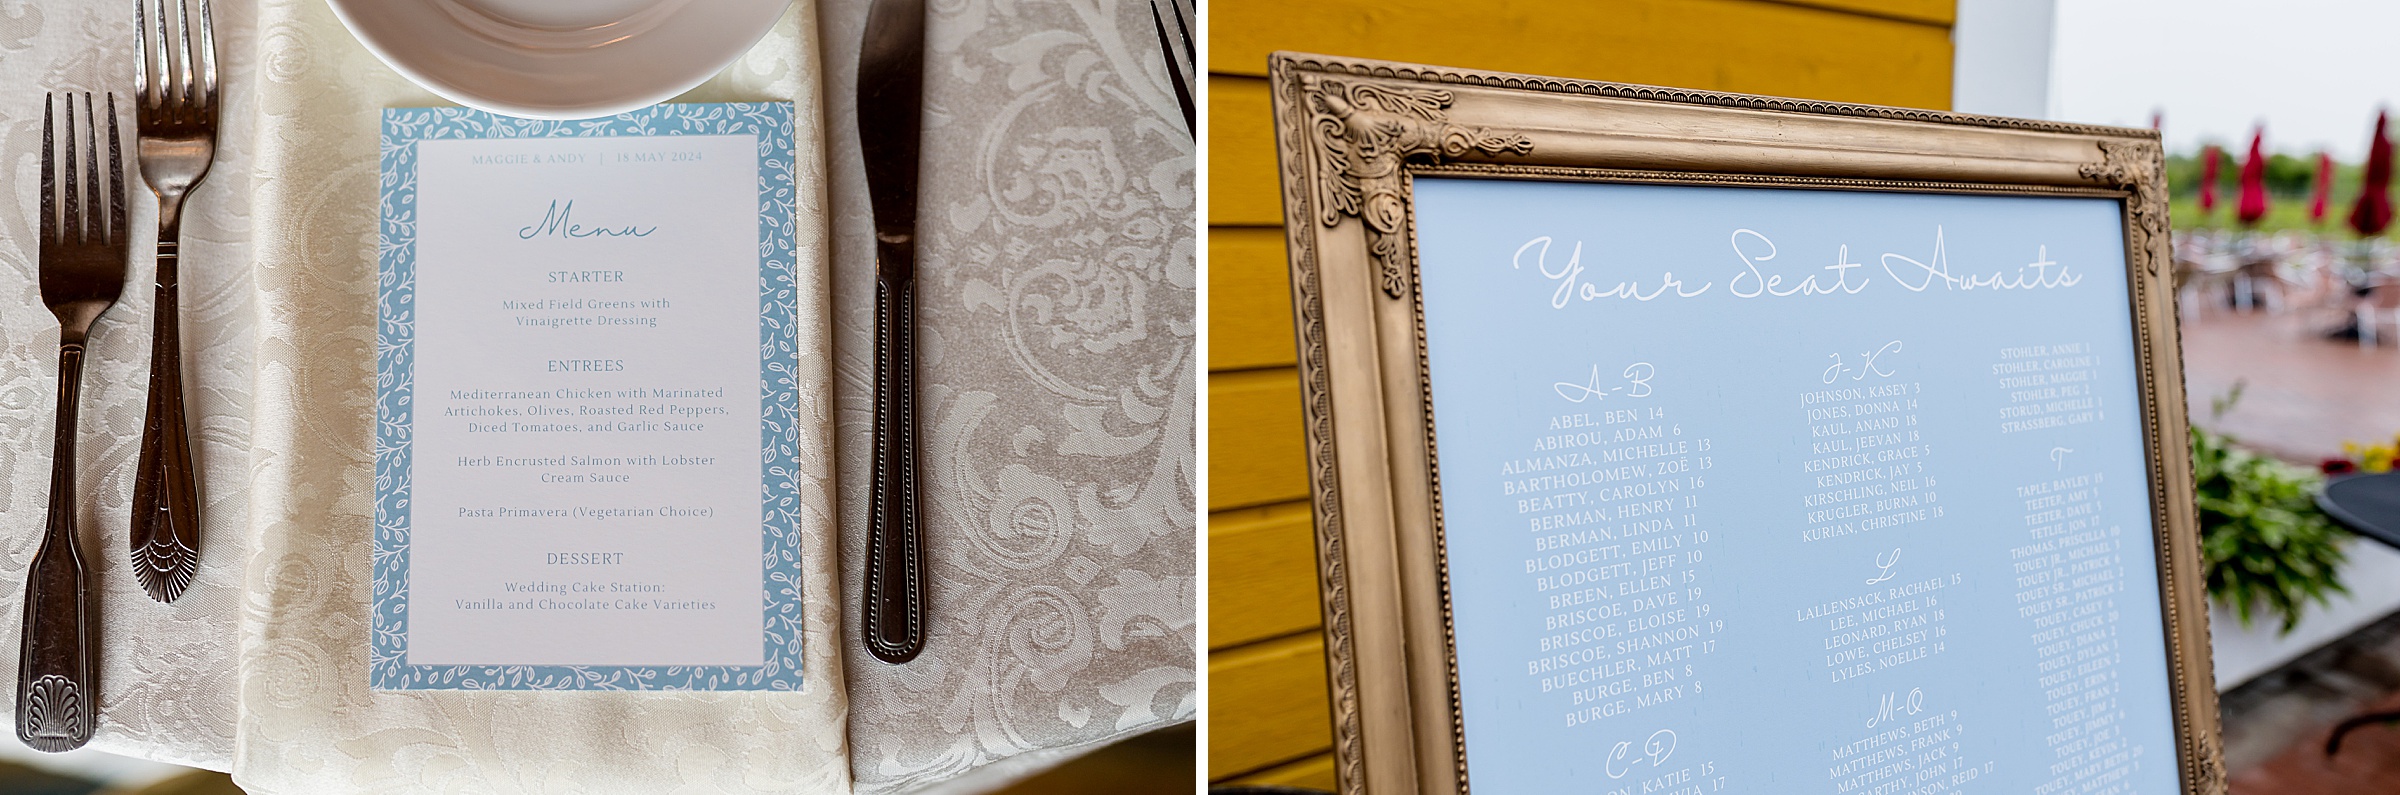 Close-up of a printed menu on a table with cutlery on the left; on the right, a framed seating chart on an easel outdoors, displaying guest tables and names.